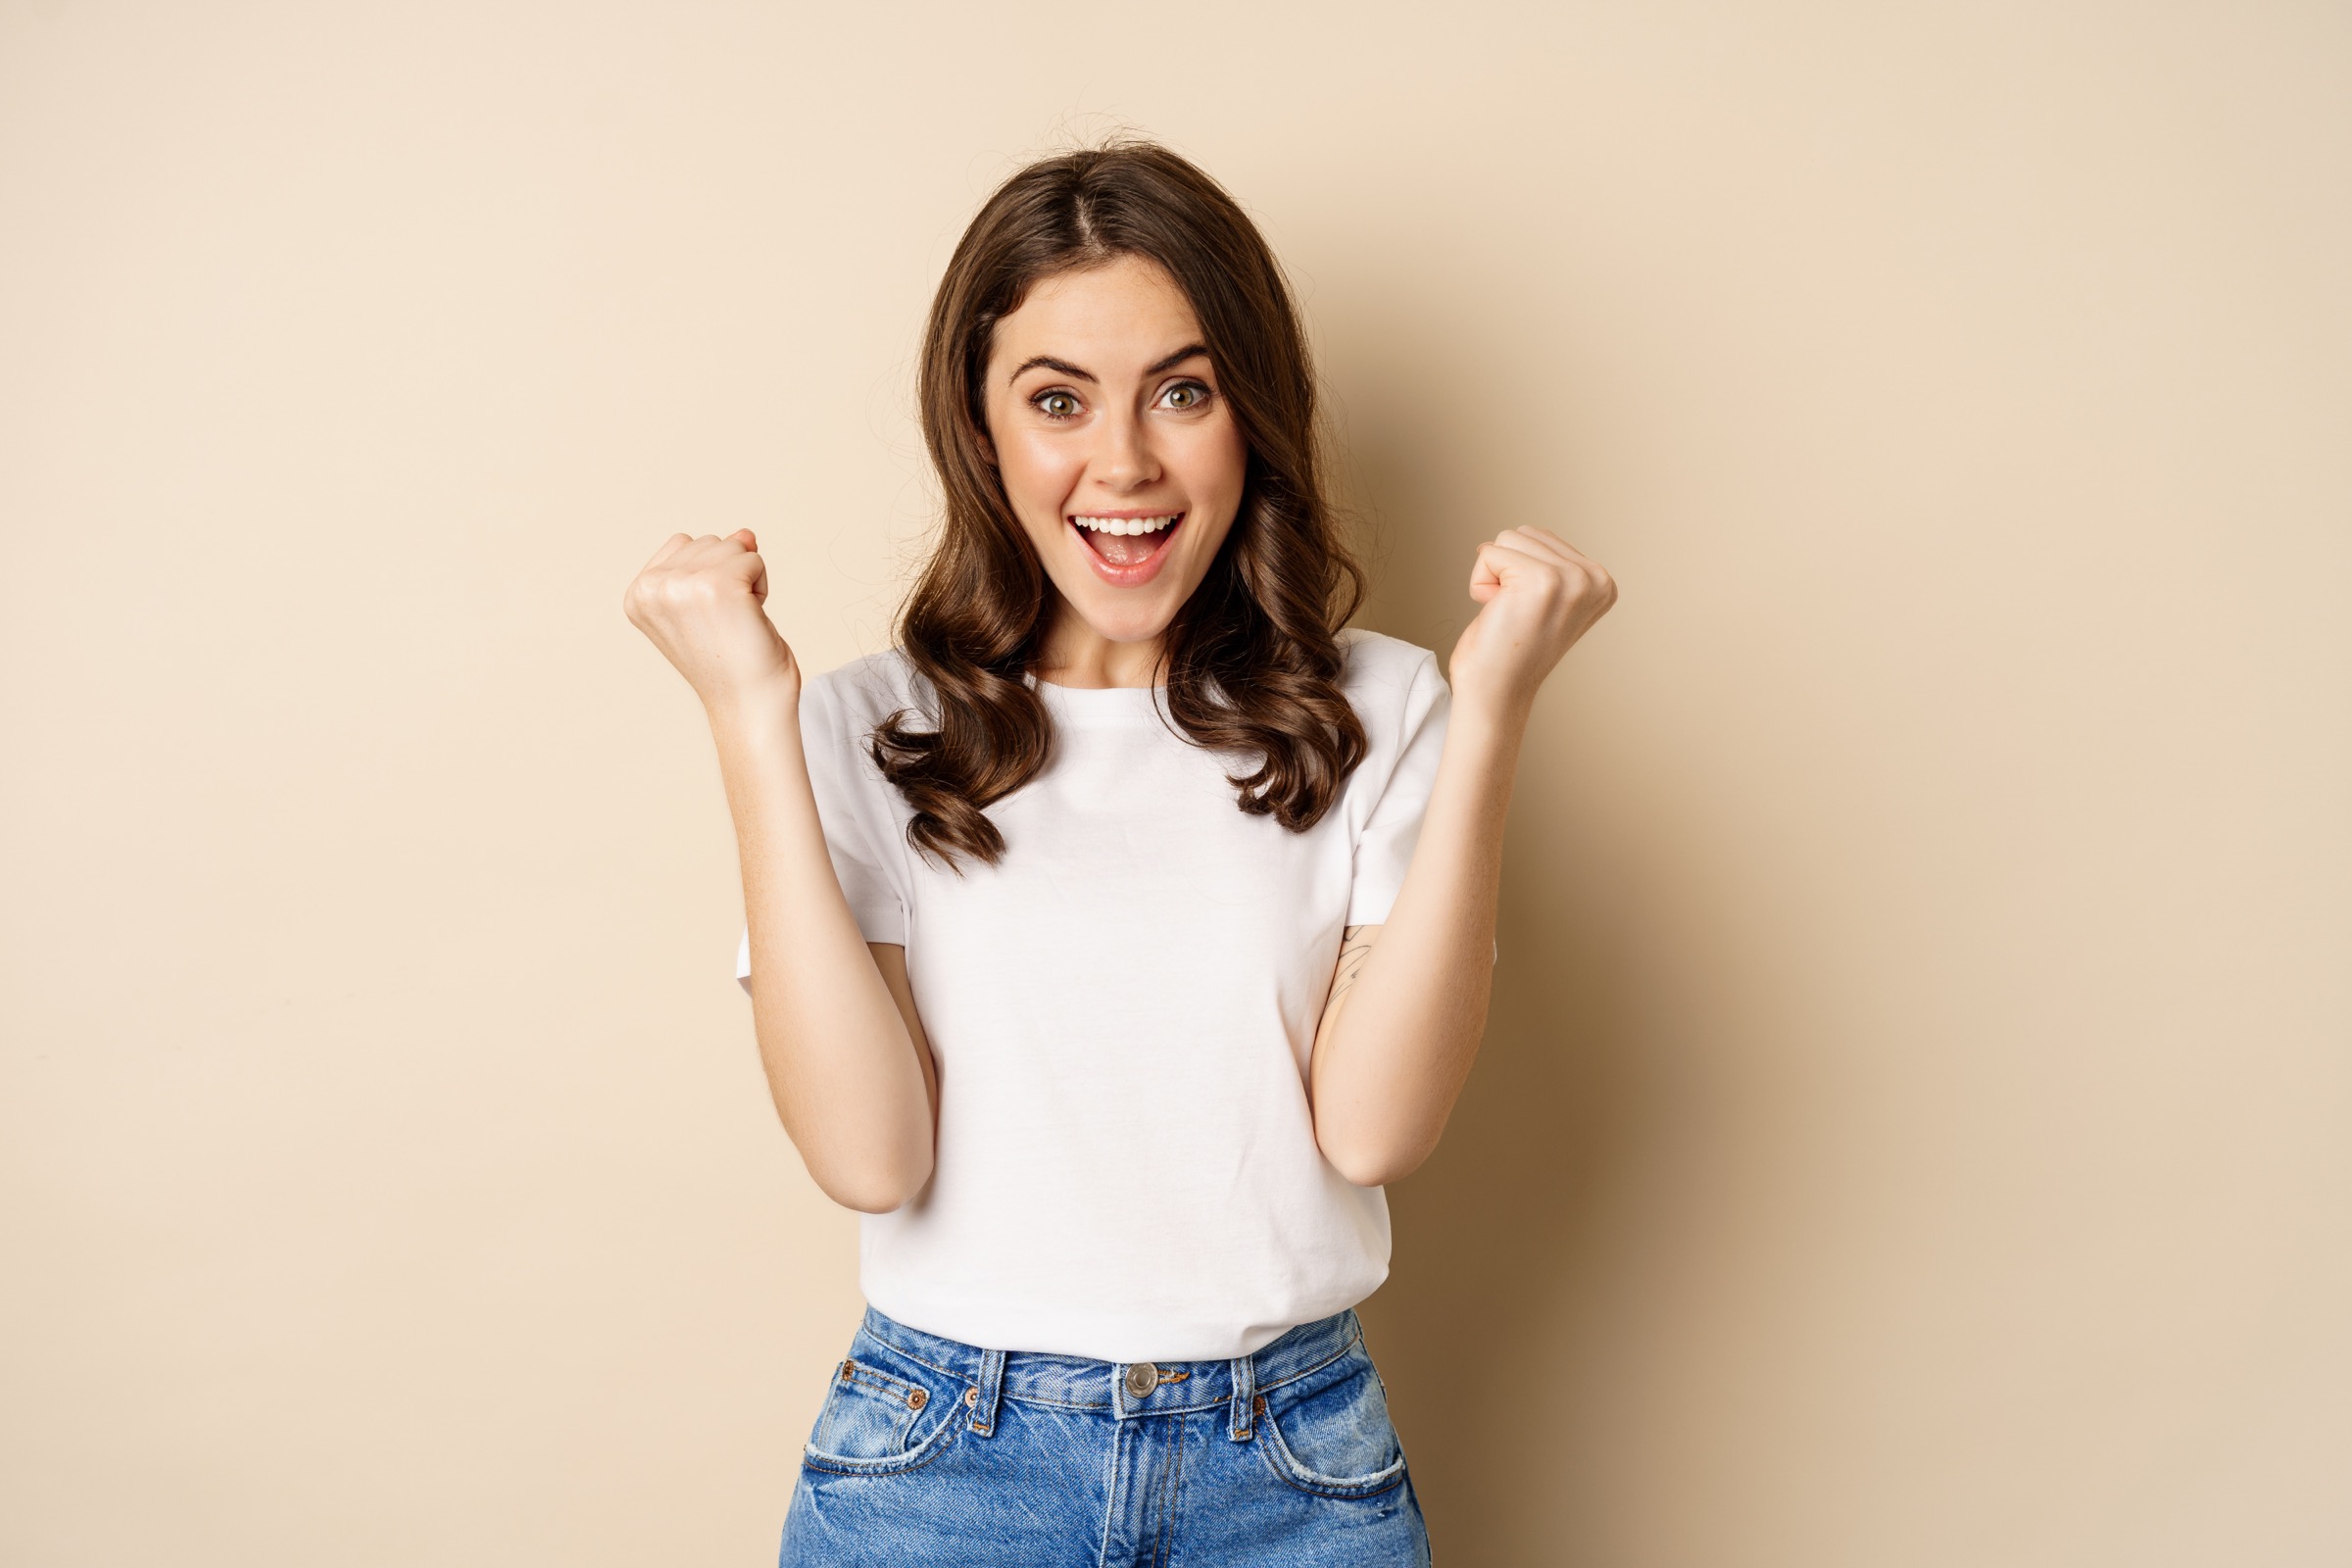 An excited young woman fist pumping